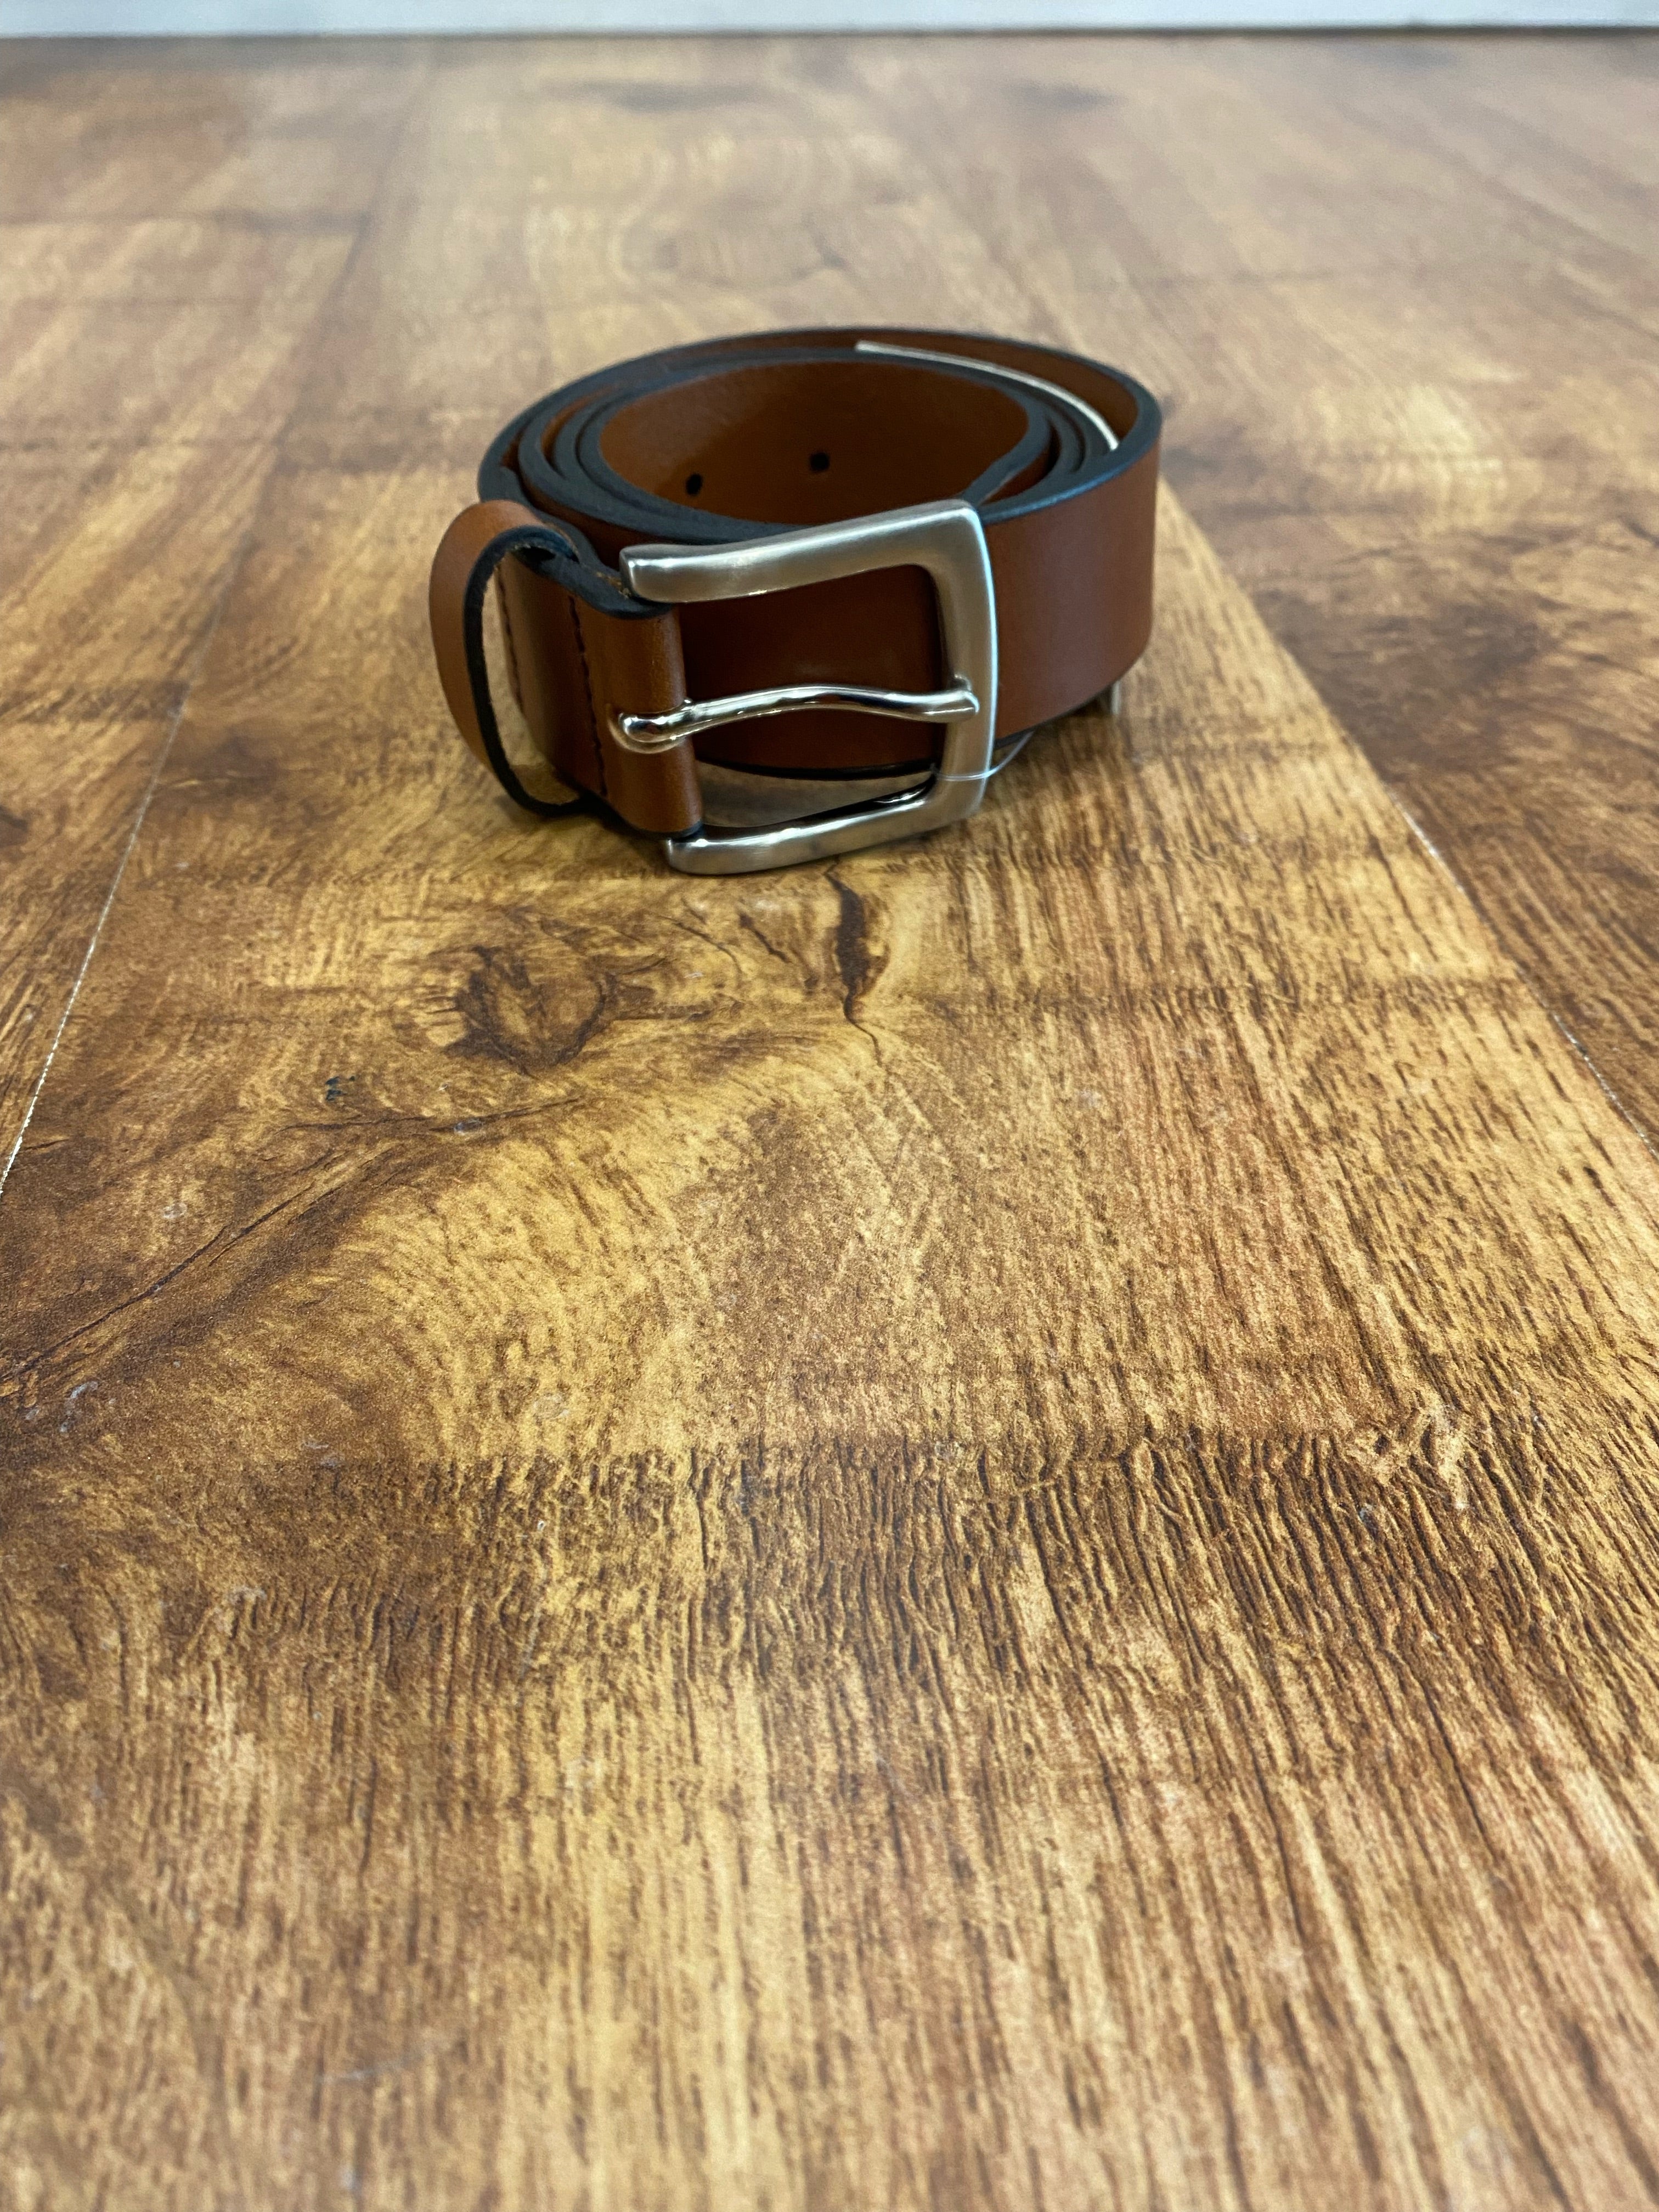 TAN LEATHER BELT FROM OXFORD LEATHER CRAFT